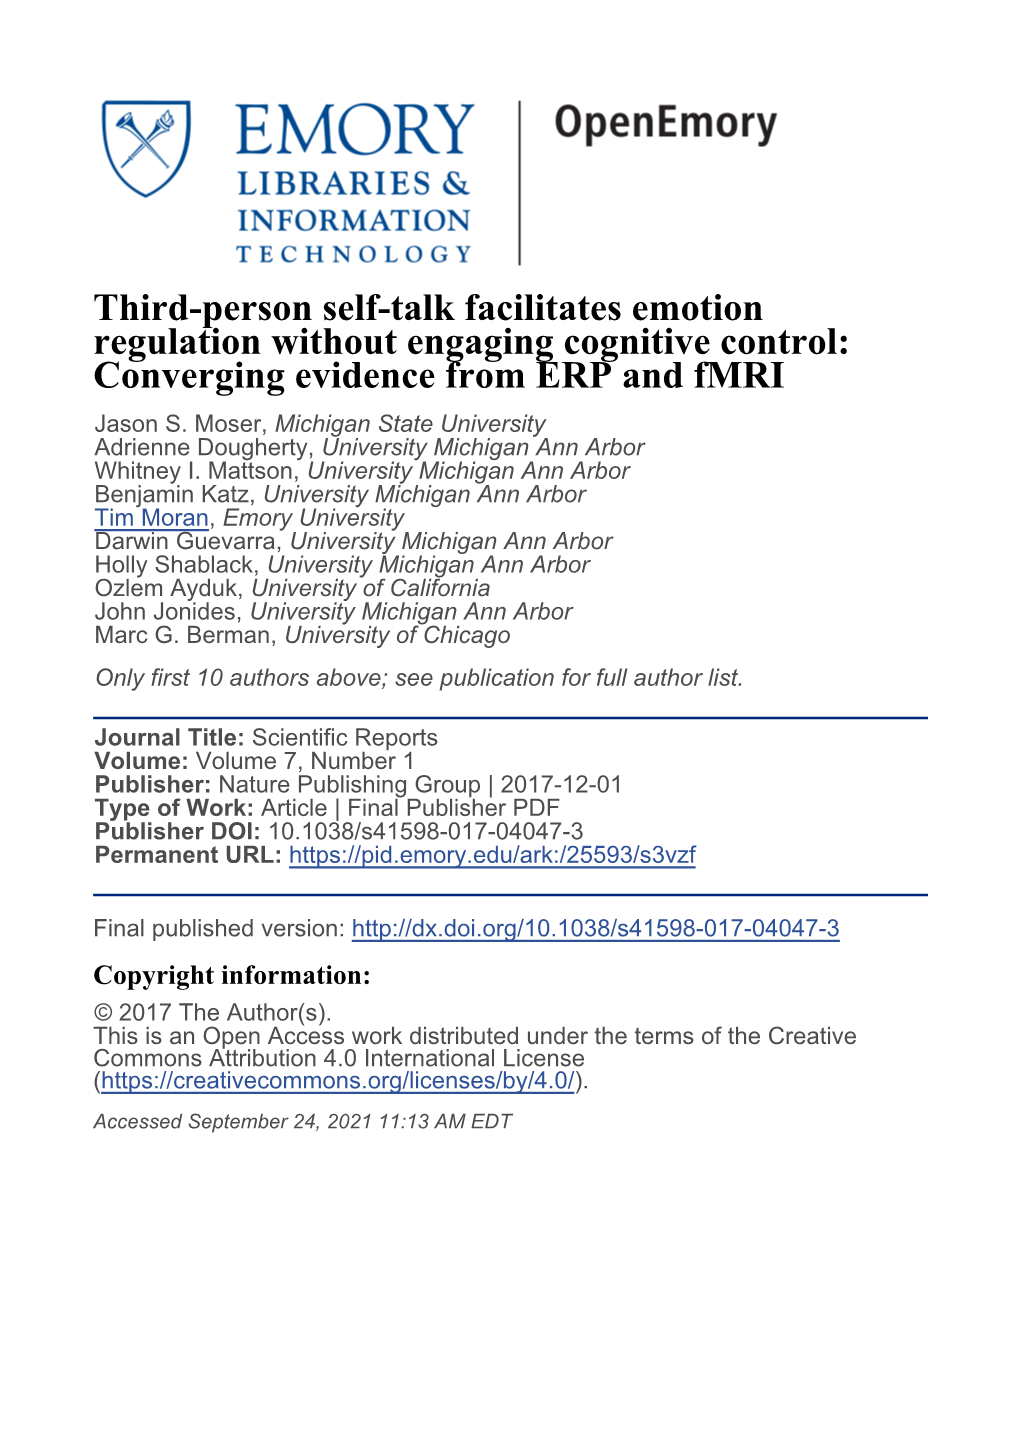 Third-Person Self-Talk Facilitates Emotion Regulation Without Engaging Cognitive Control: Converging Evidence from ERP and Fmri Jason S